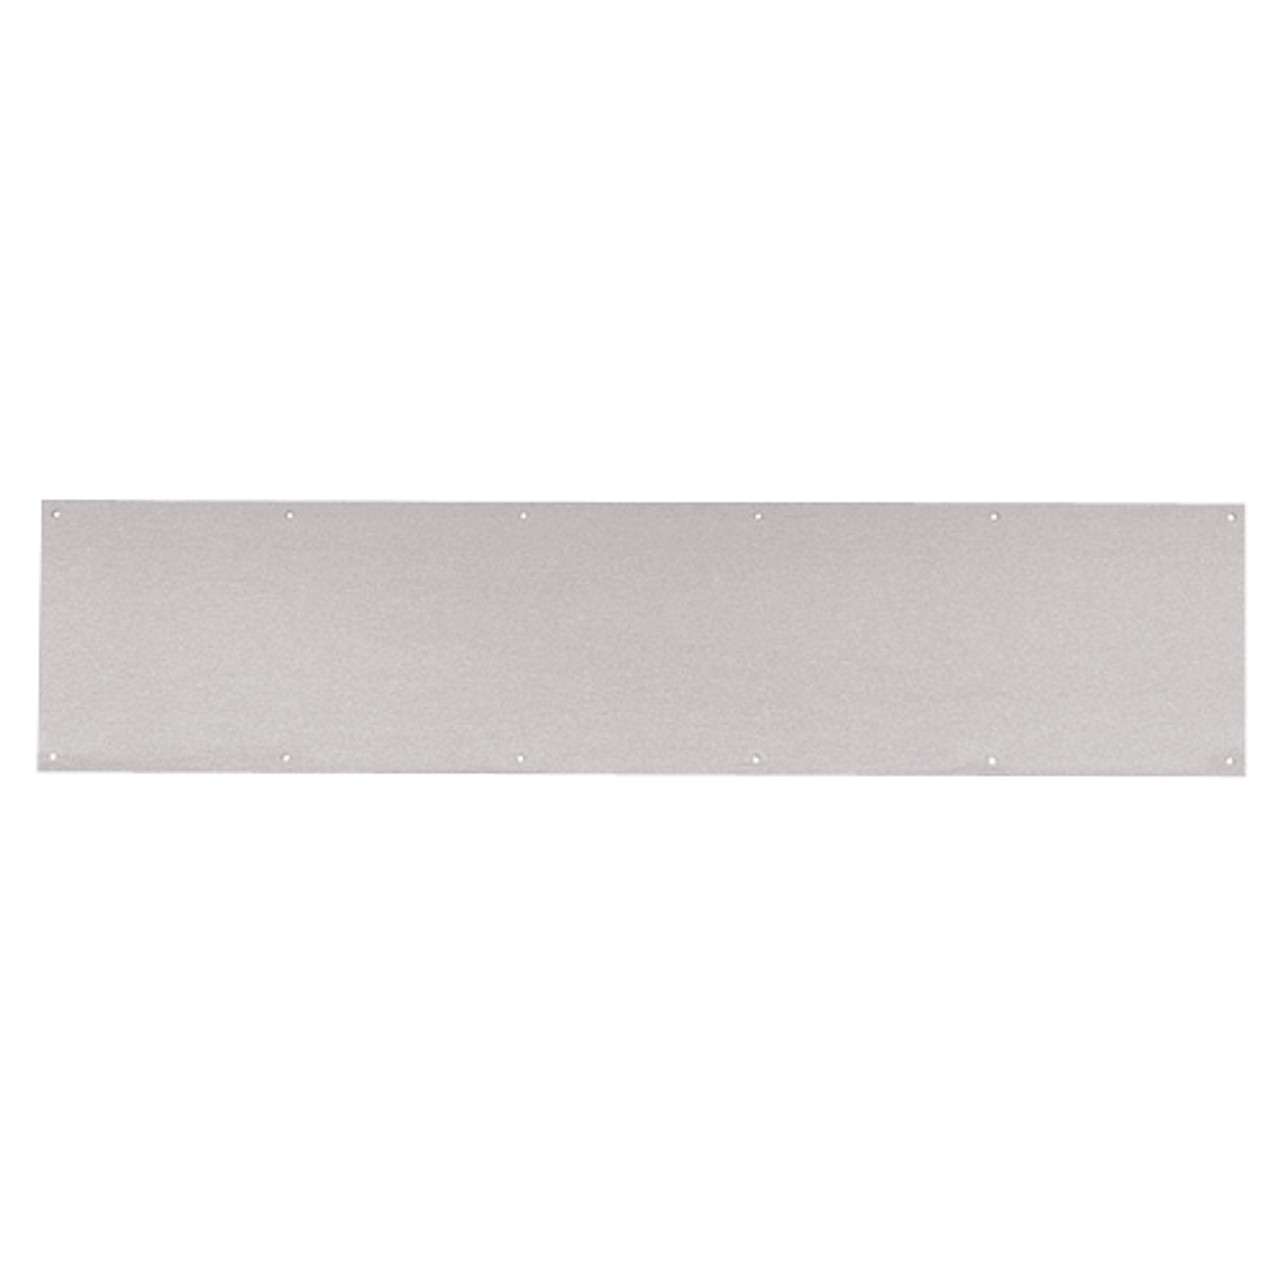 8400-US32D-45x36-B-CS Ives 8400 Series Protection Plate in Satin Stainless Steel